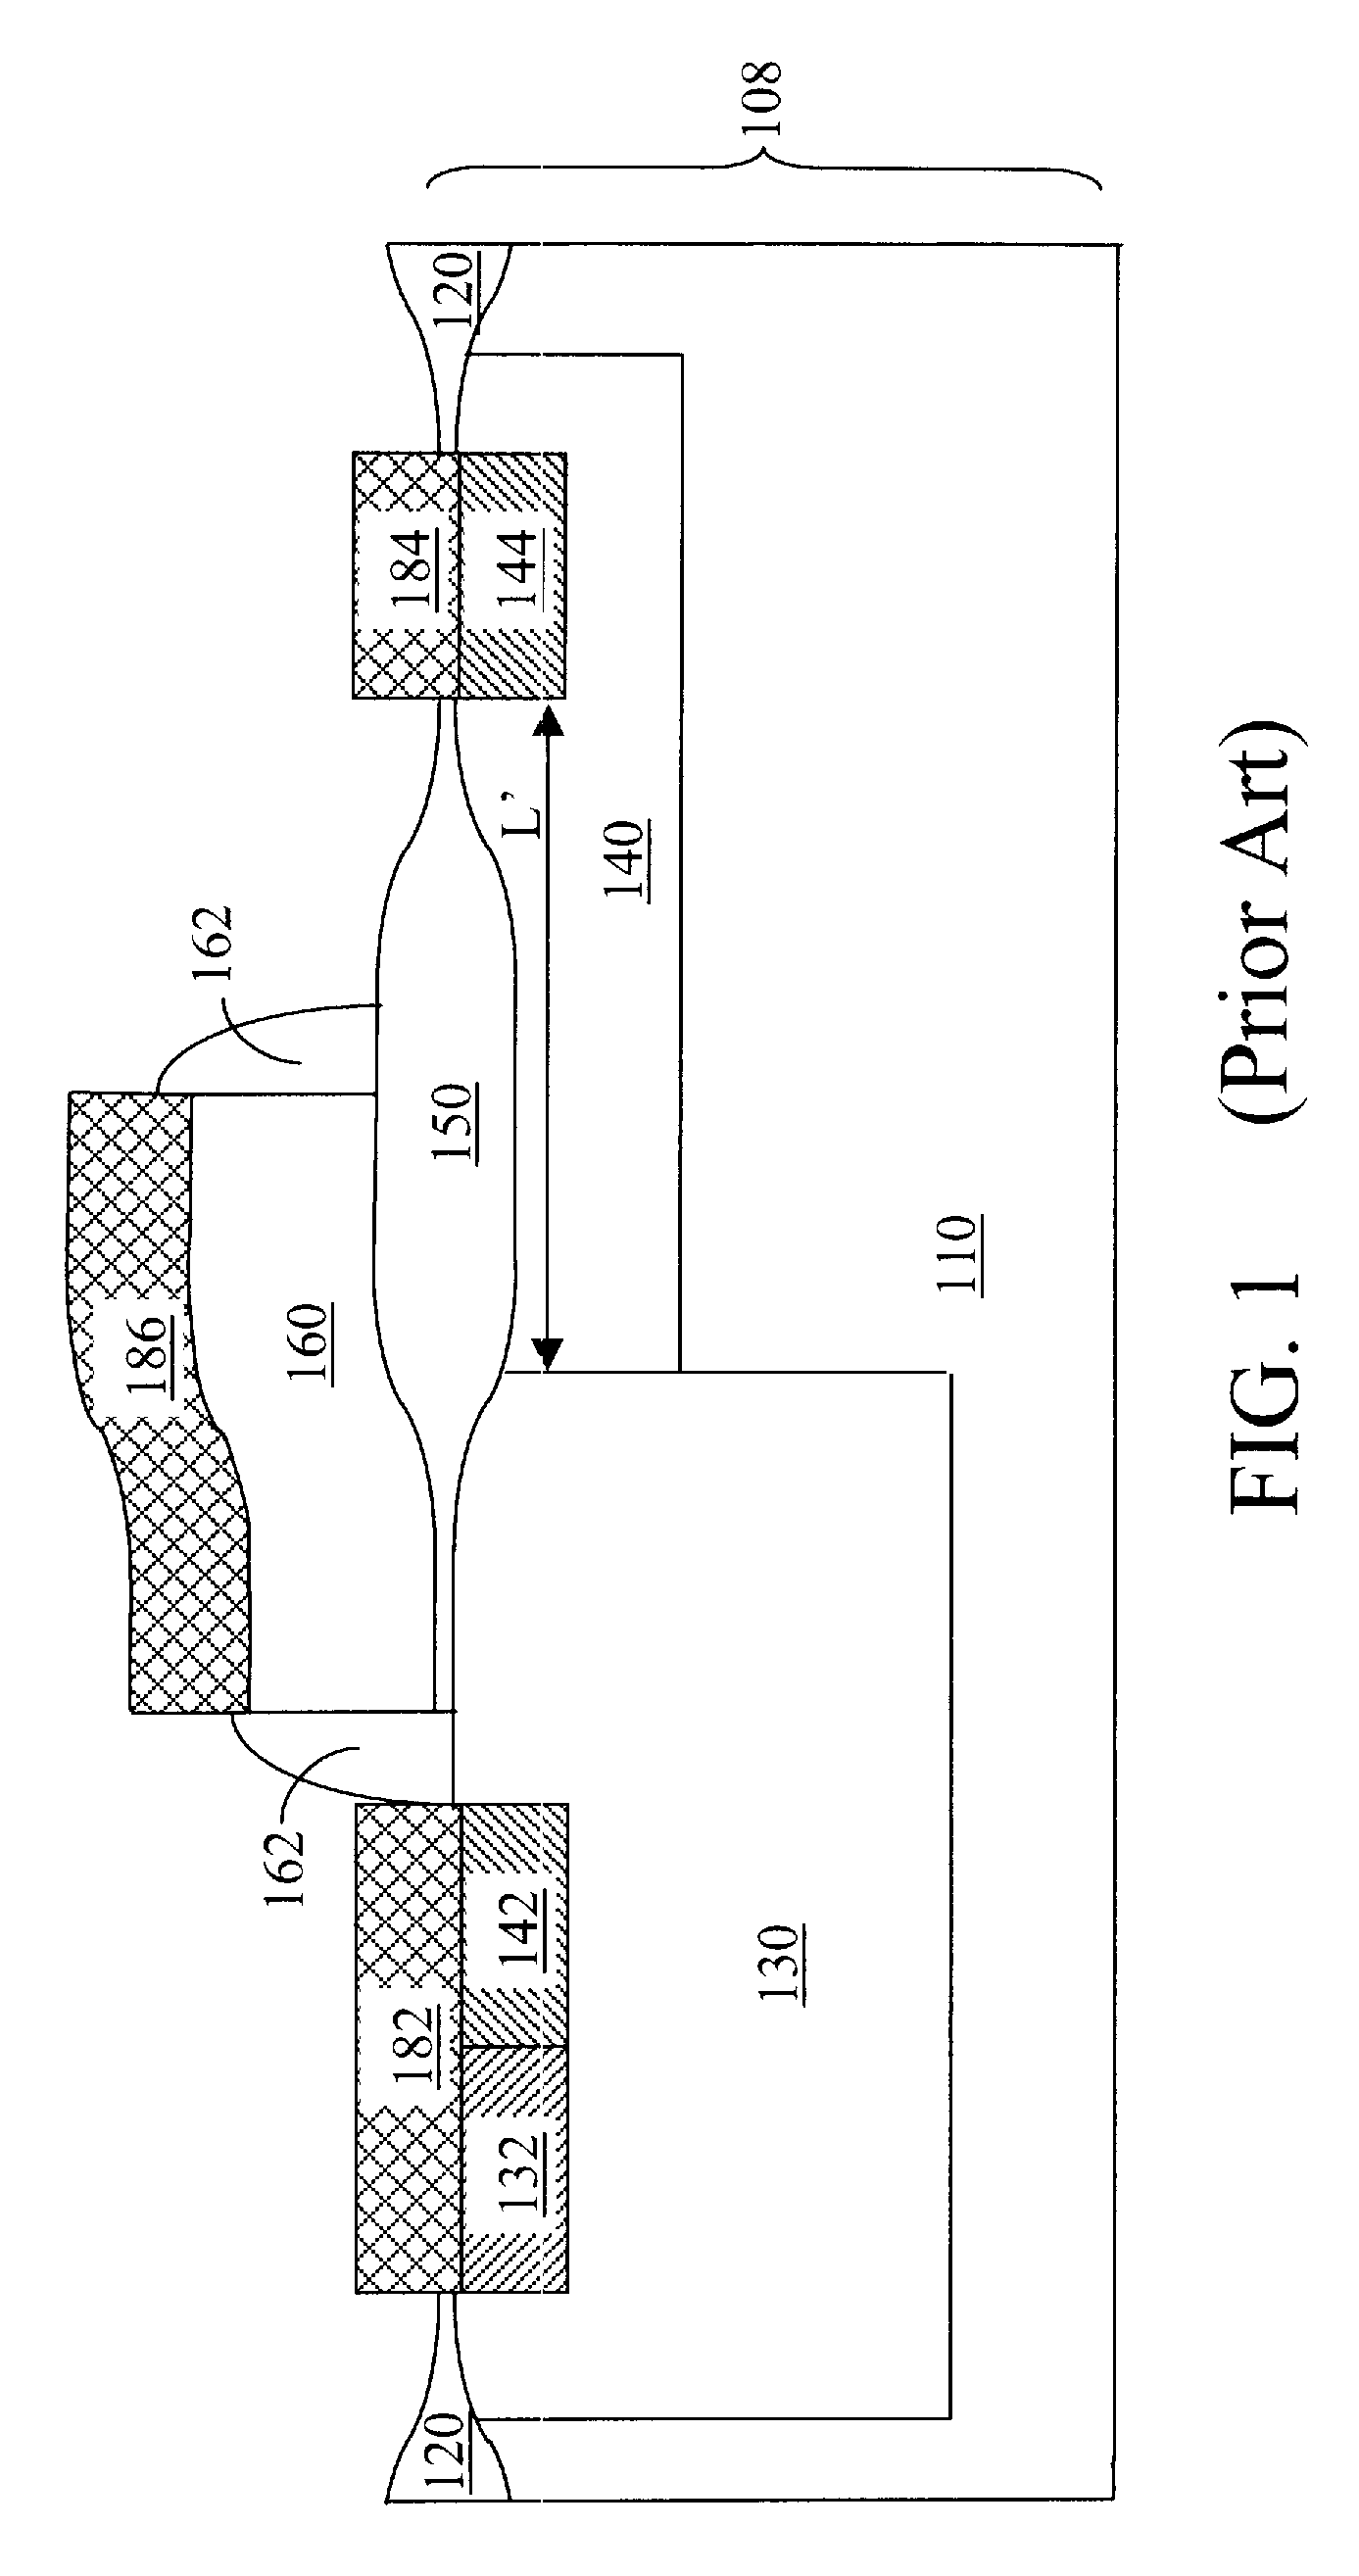 Lateral diffusion field effect transistor with drain region self-aligned to gate electrode